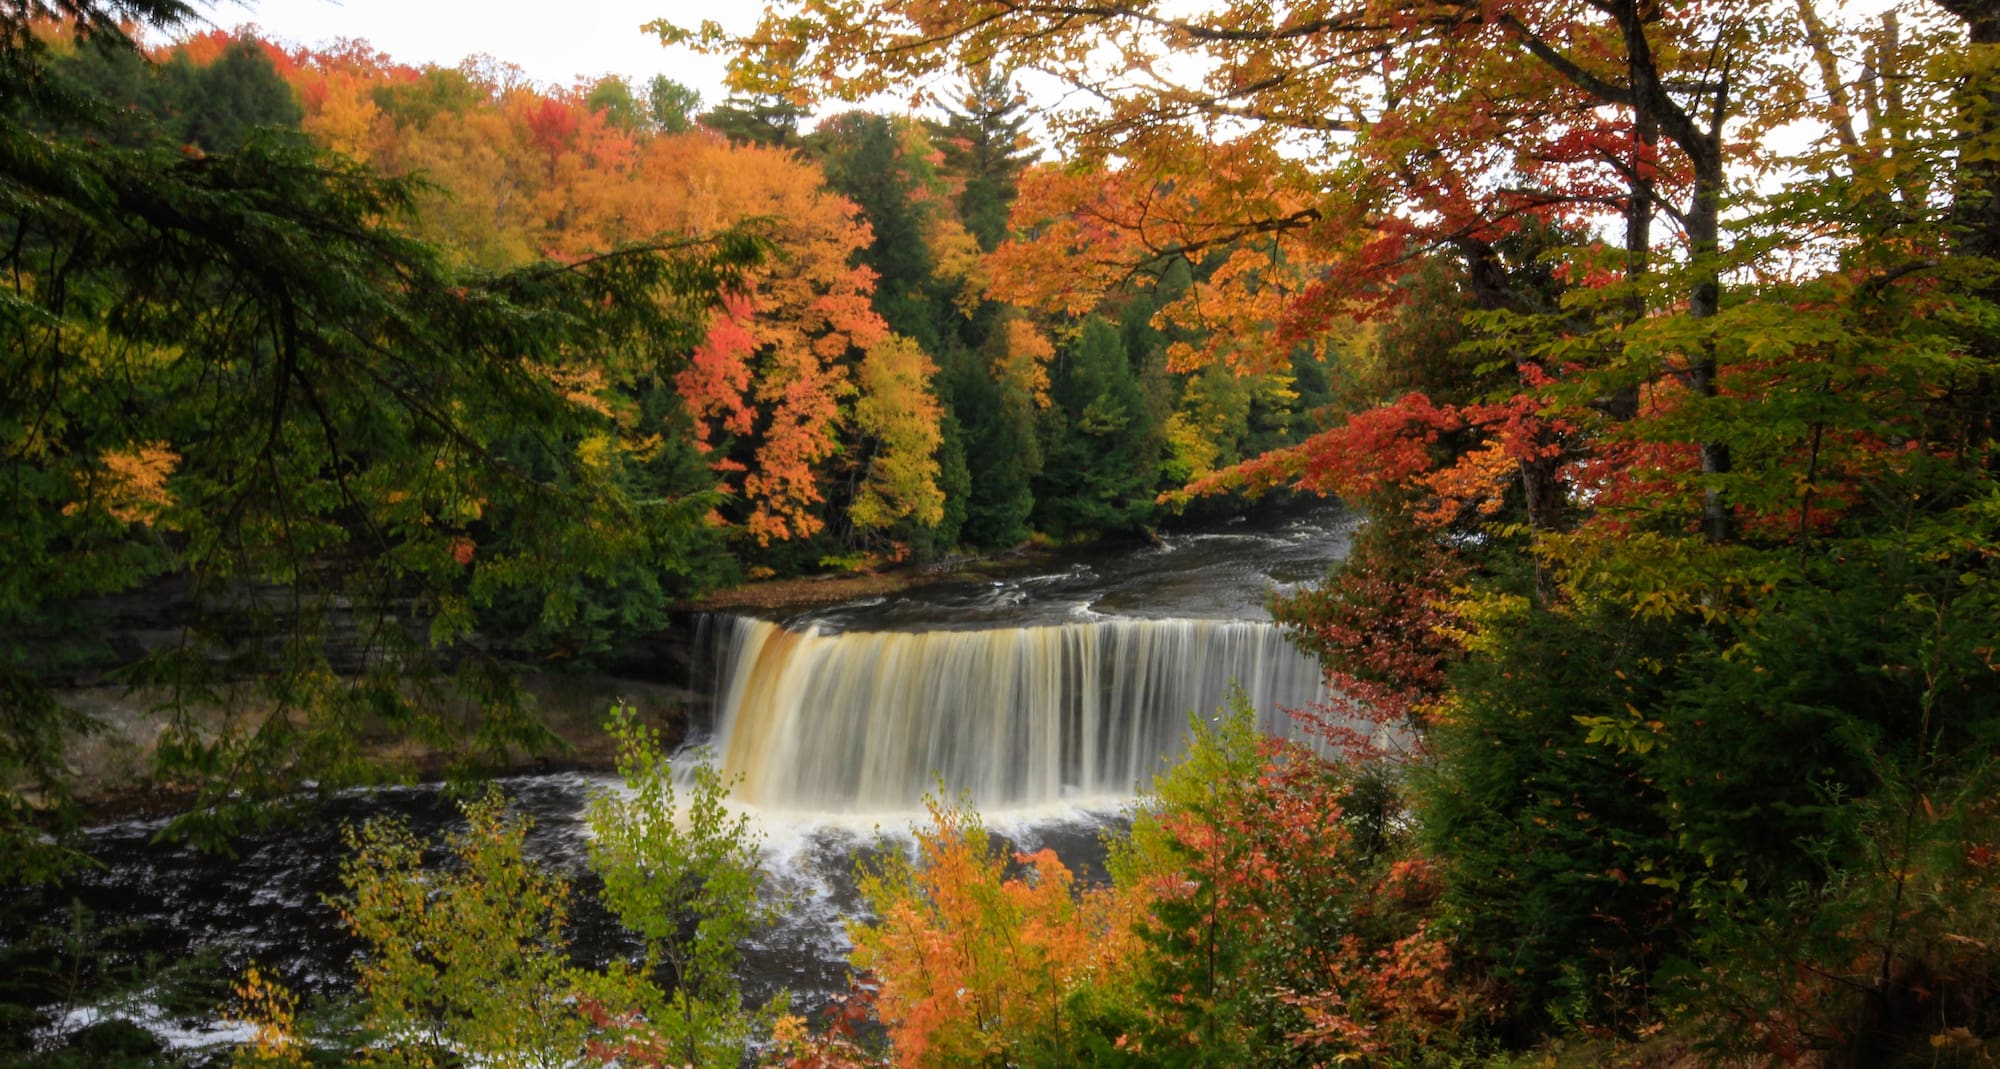 Cascading waterfalls surrounded by red and orange leaves of the fall foliage.